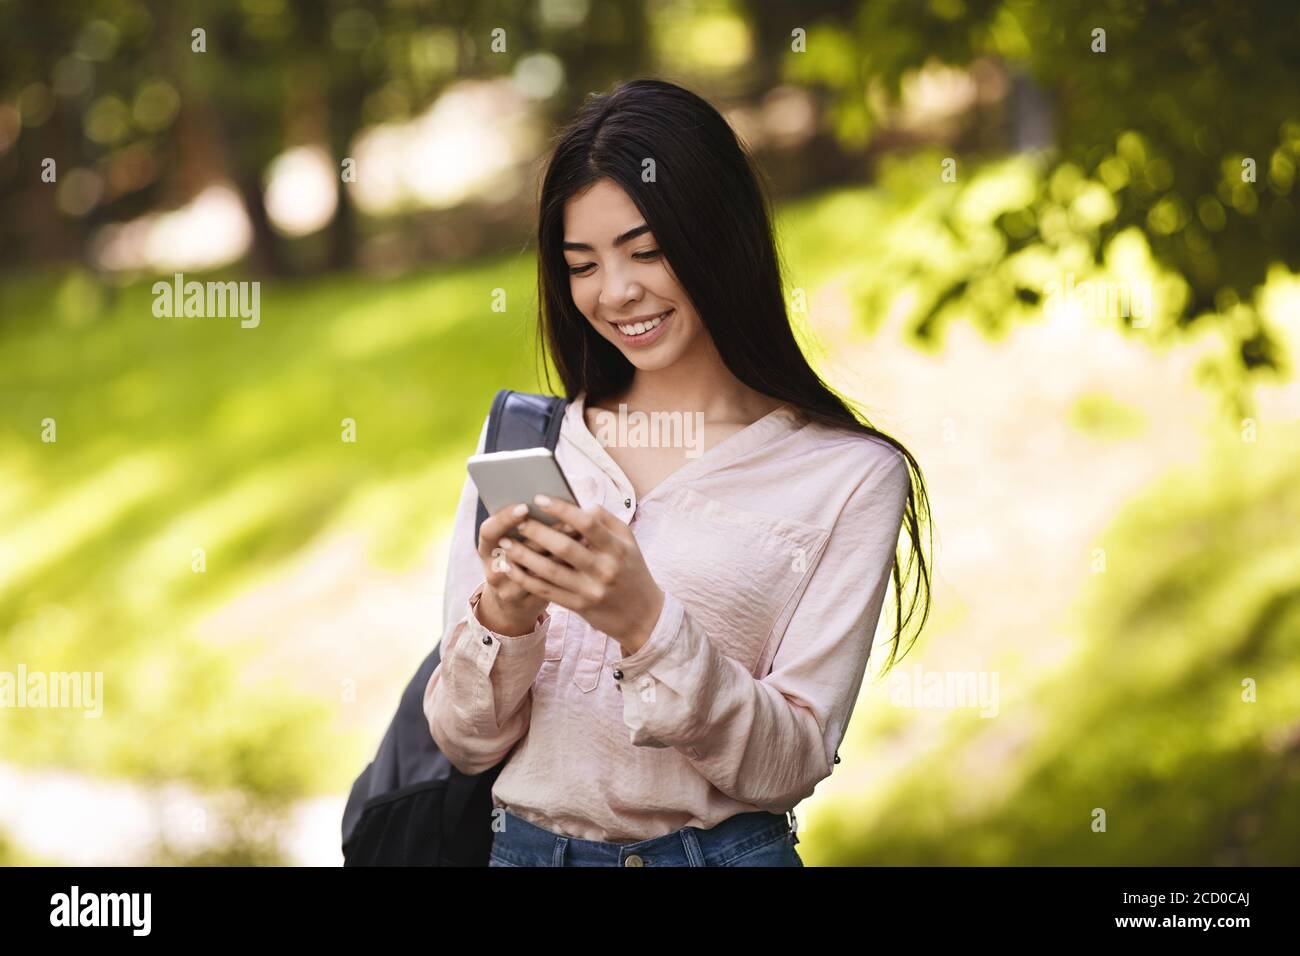 Cheerful asian teen student girl with backpack using smartphone outdoors Stock Photo